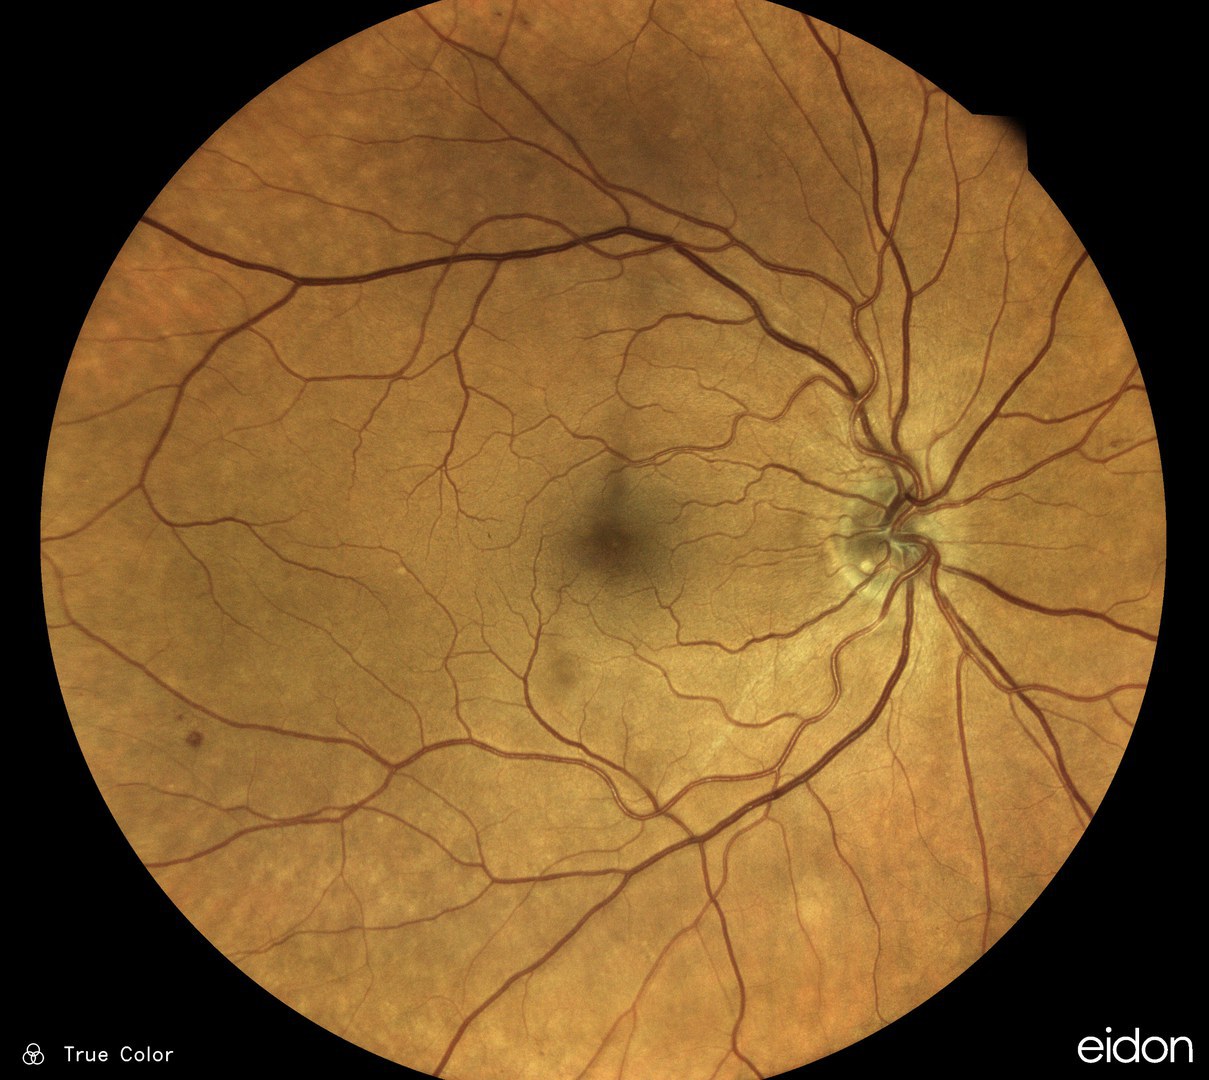 The fundus of the human eye is well perfused. - When the vessels are photographed through the lens of the eye, neuronal networks can detect certain diseases on the basis of the images.